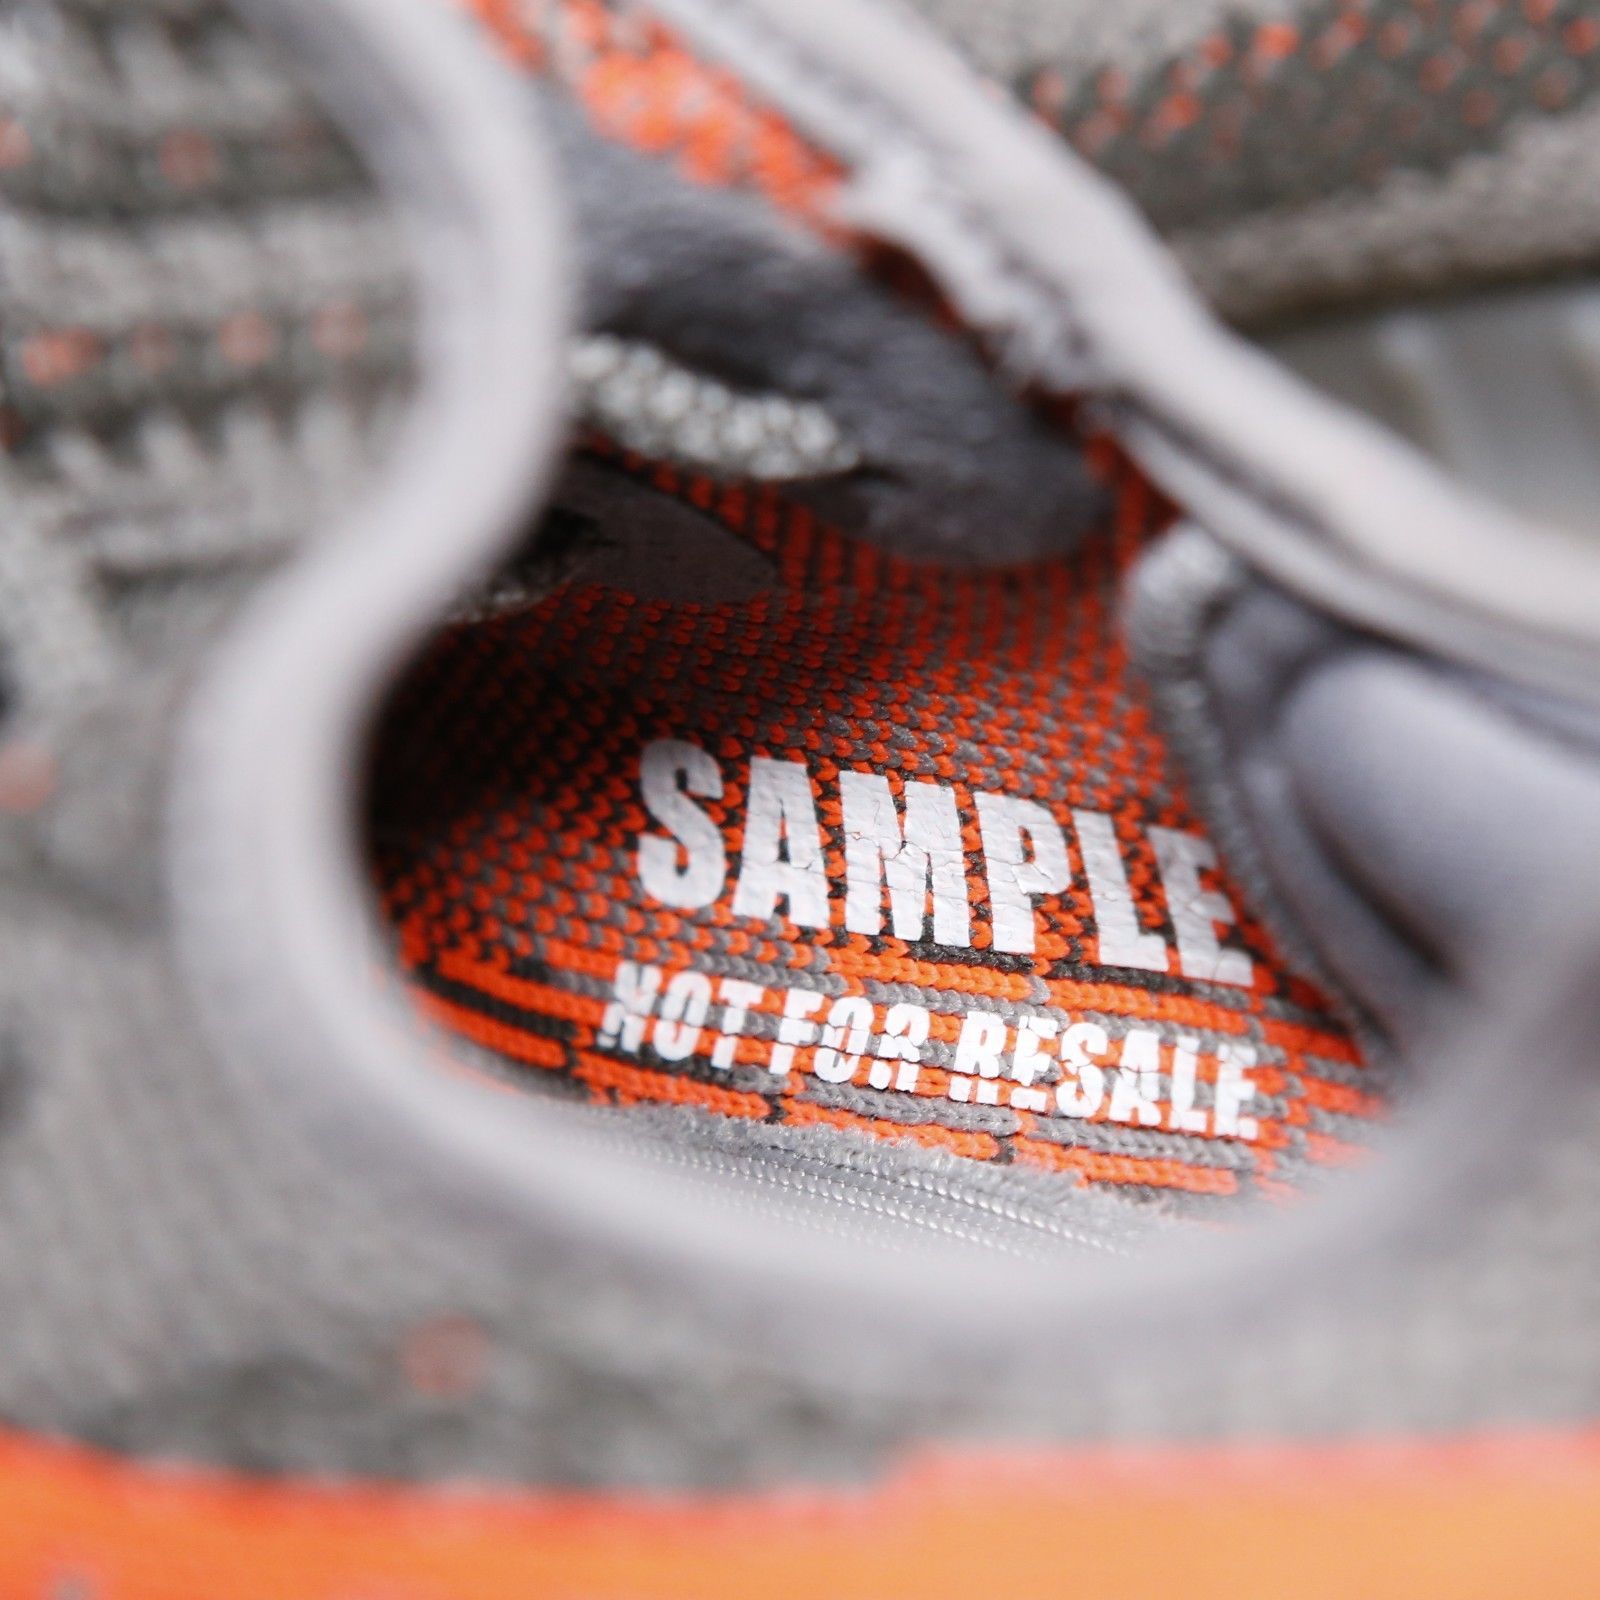 adidas shoes sample not for resale